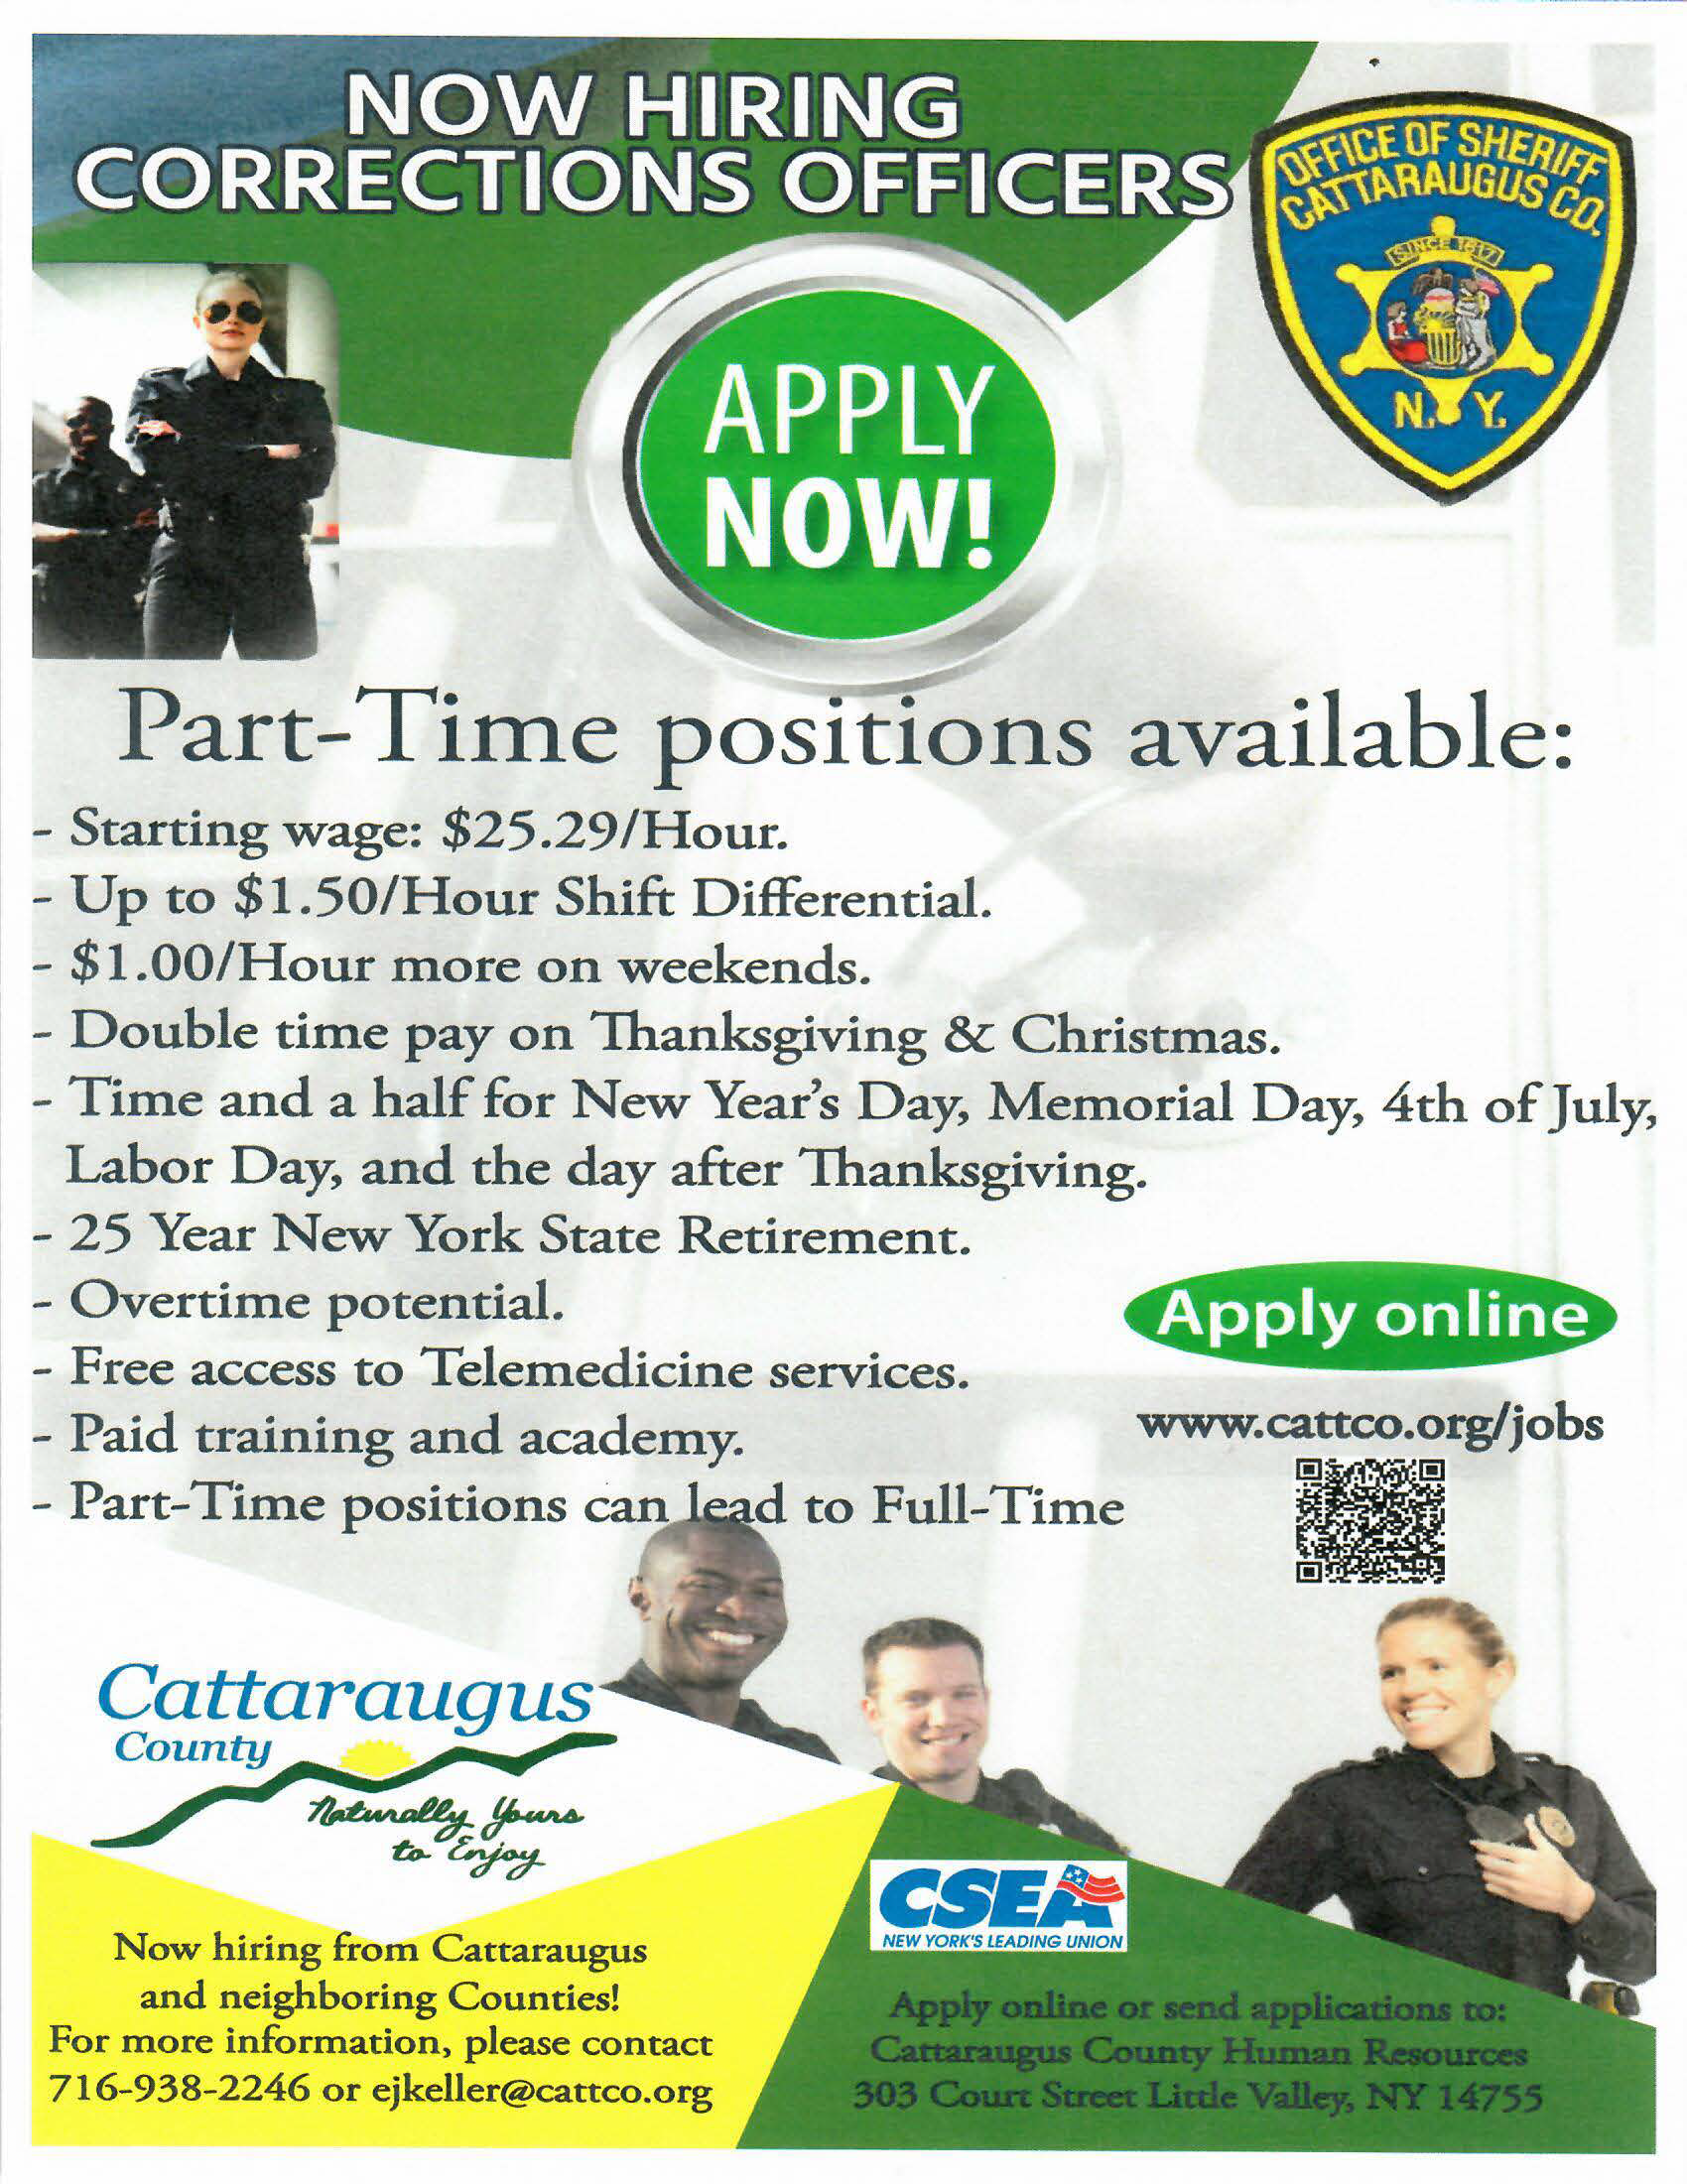 Now Hiring Corrections Officers flyer - 20230728